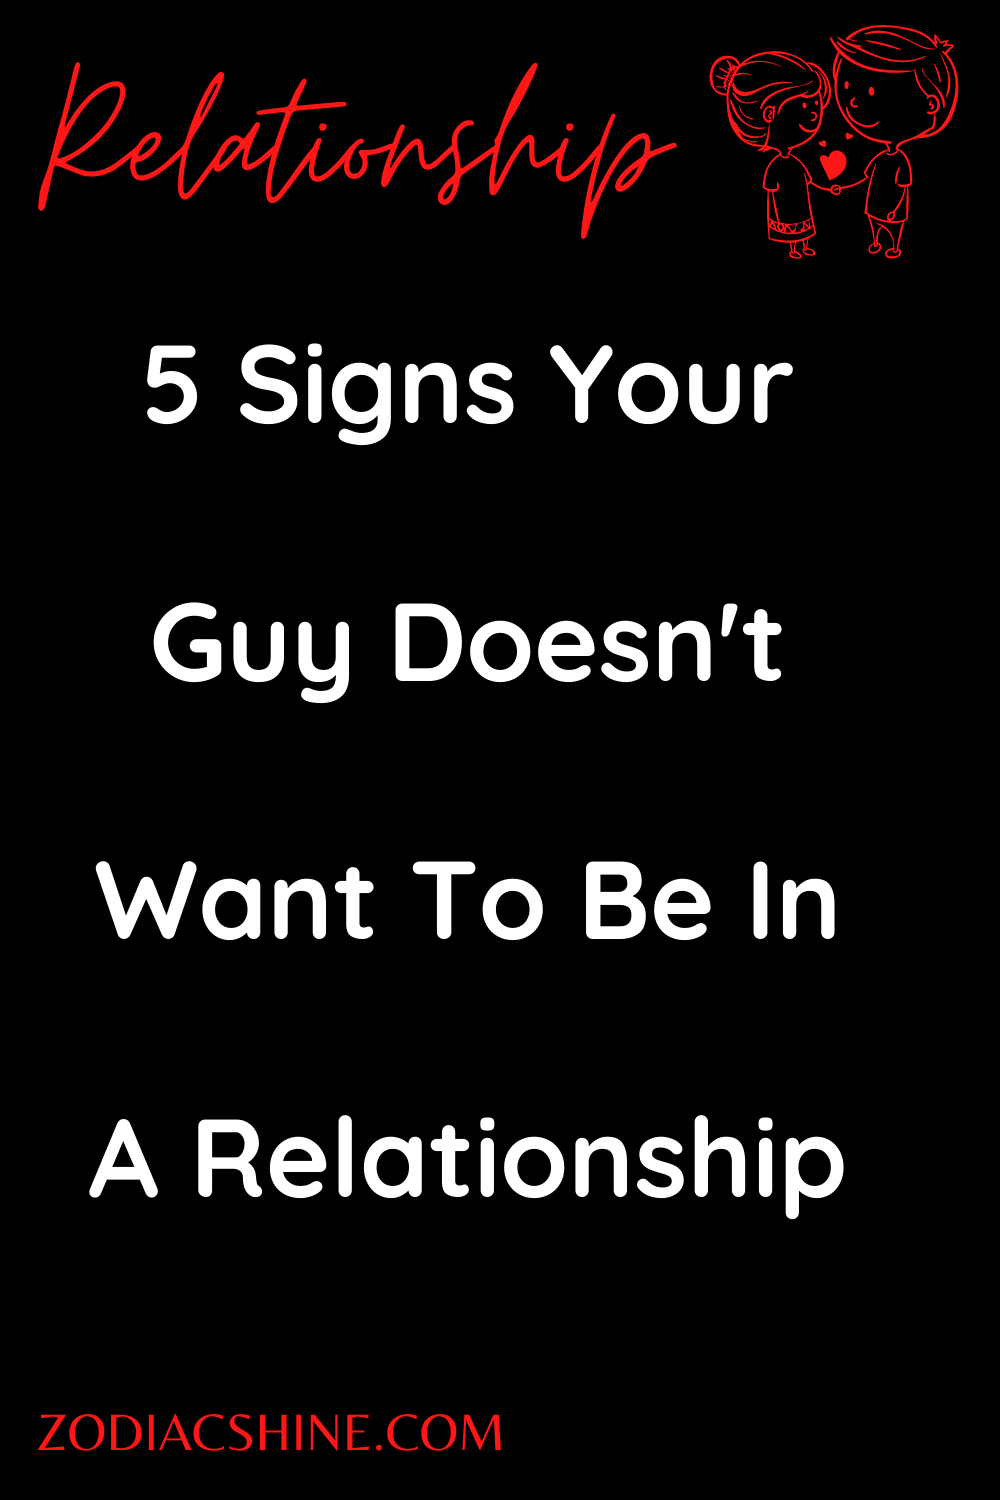 5 Signs Your Guy Doesn't Want To Be In A Relationship